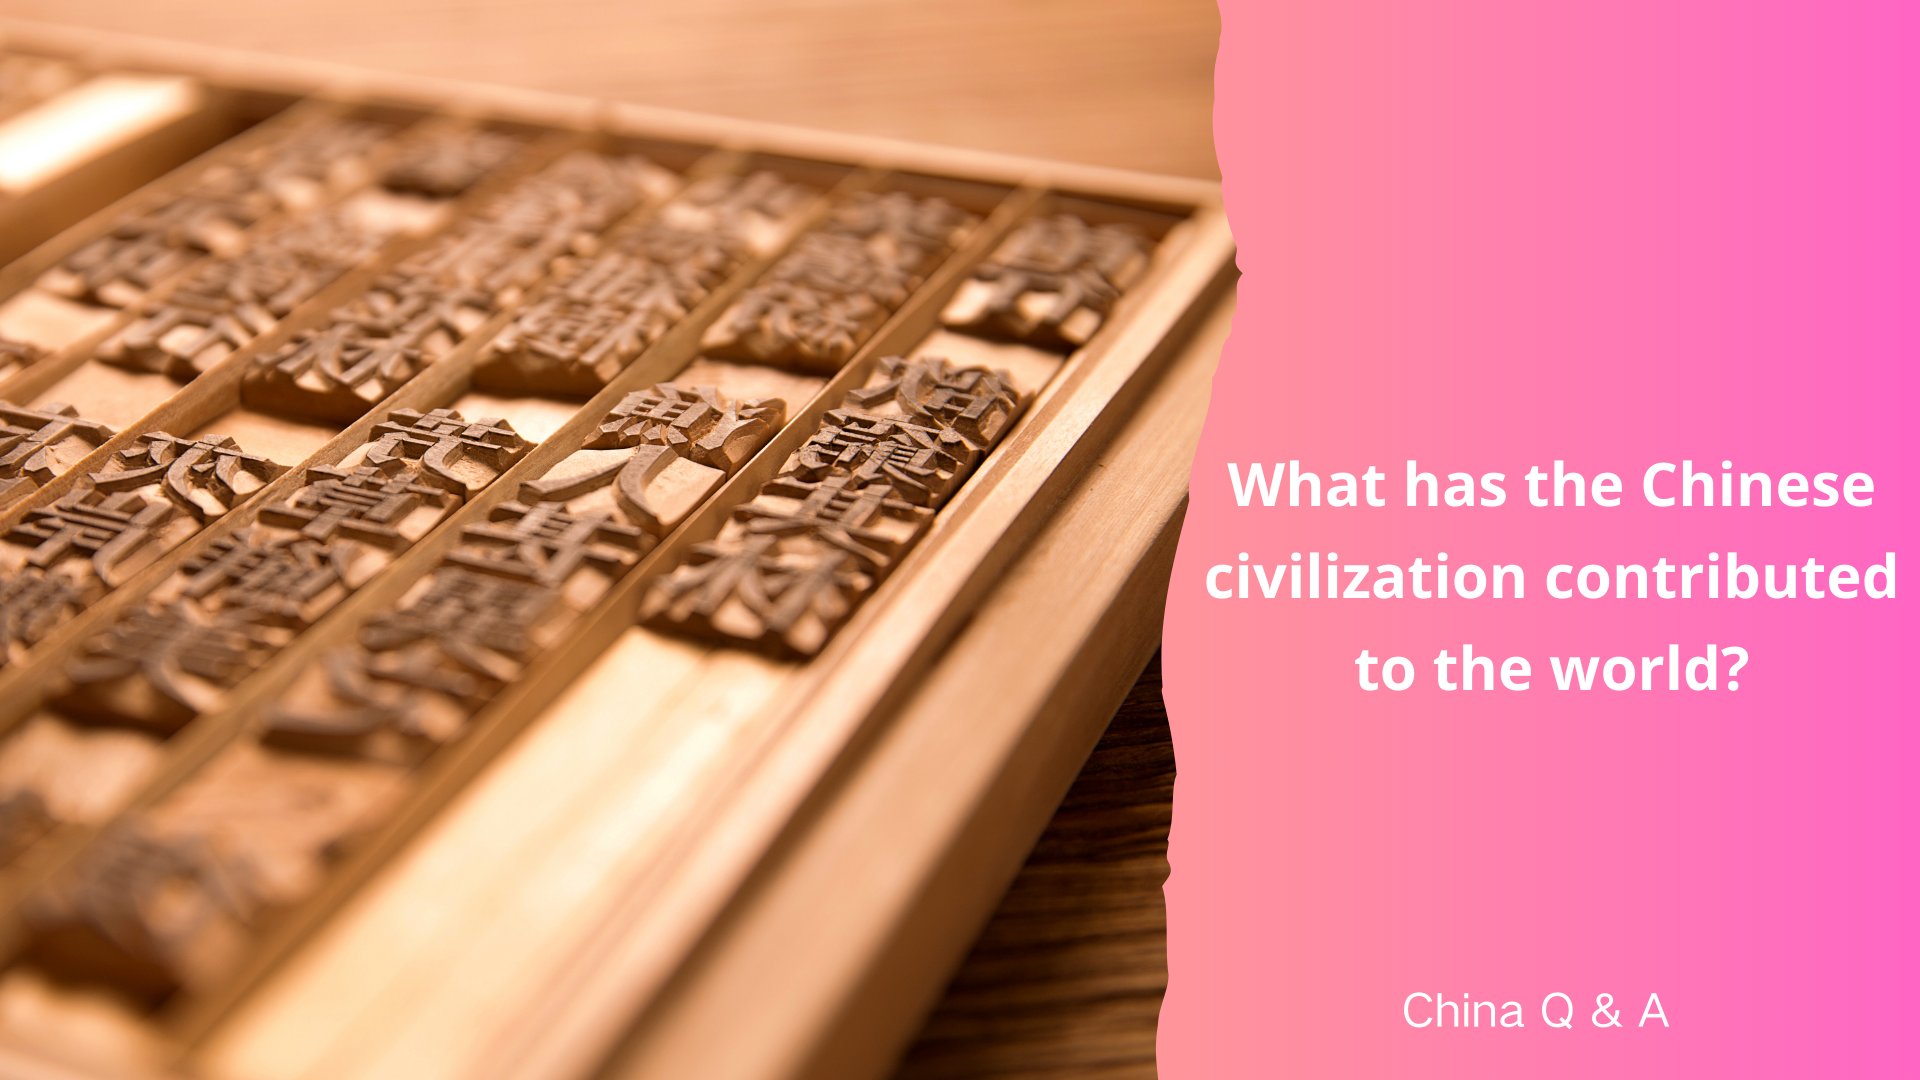 What has the Chinese civilization contributed to the world?